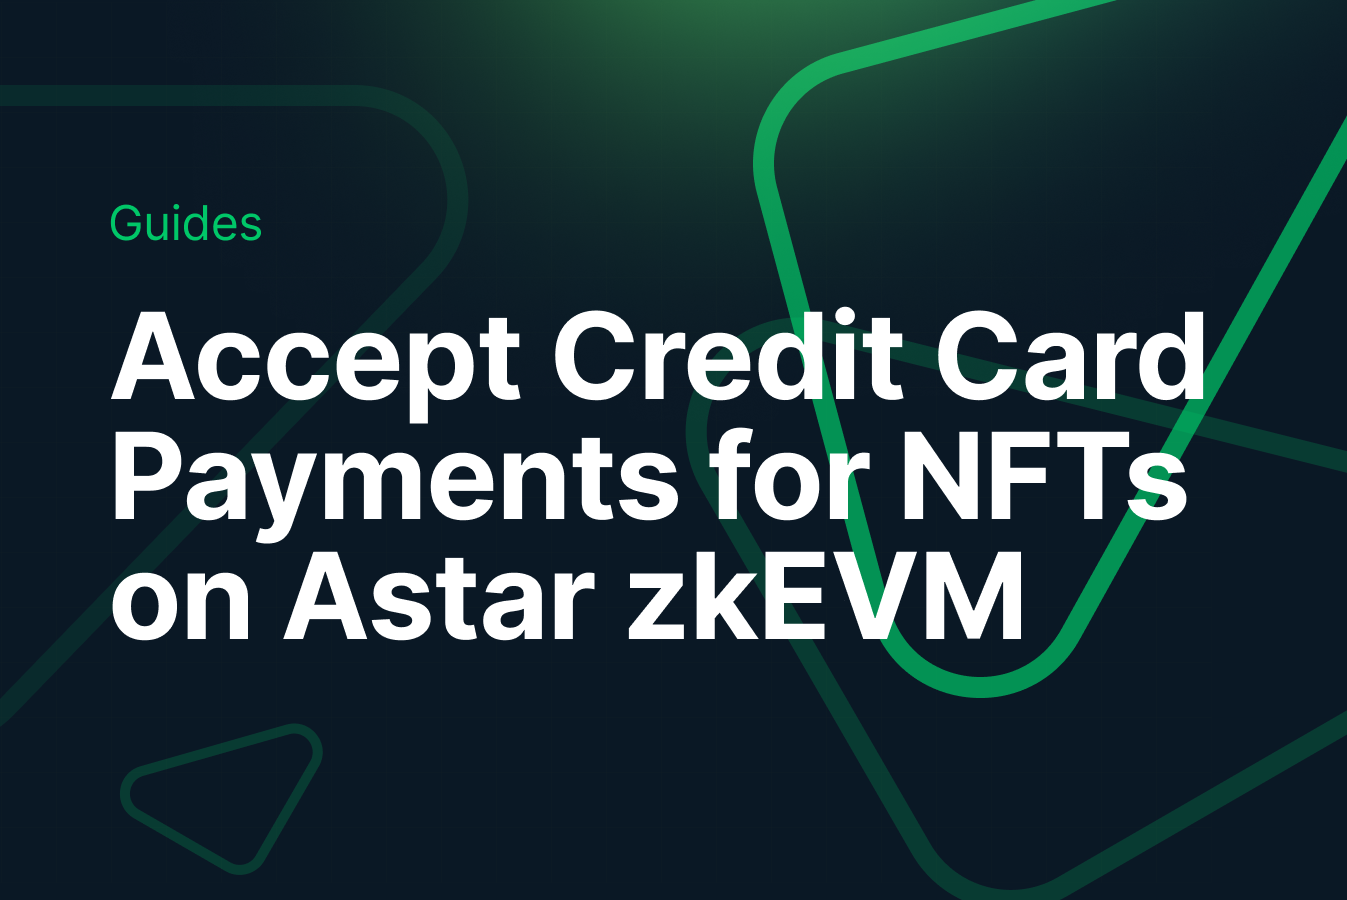 How to Enable Credit Card and Cross-chain Payments for your NFTs on Astar zkEVM